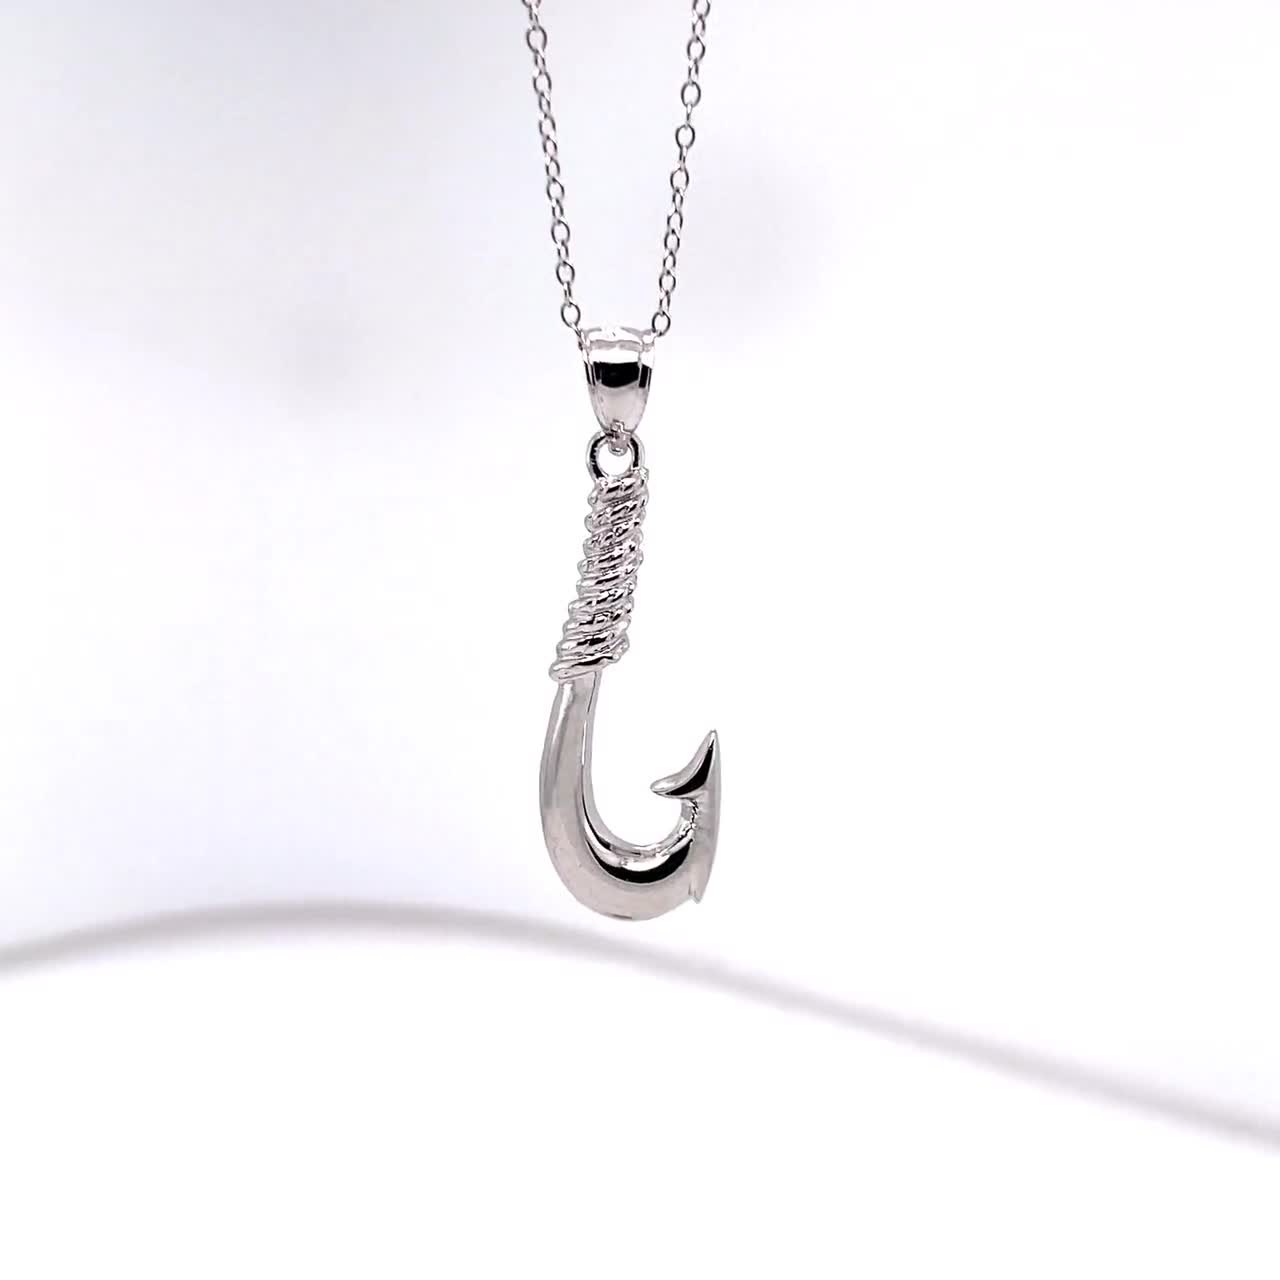 Silver Fish Hook Pendant Necklace 925 Sterling Silver Silver Adjustable  Necklace 16 18 Fish Hook Necklace Hook Pendant -  Norway